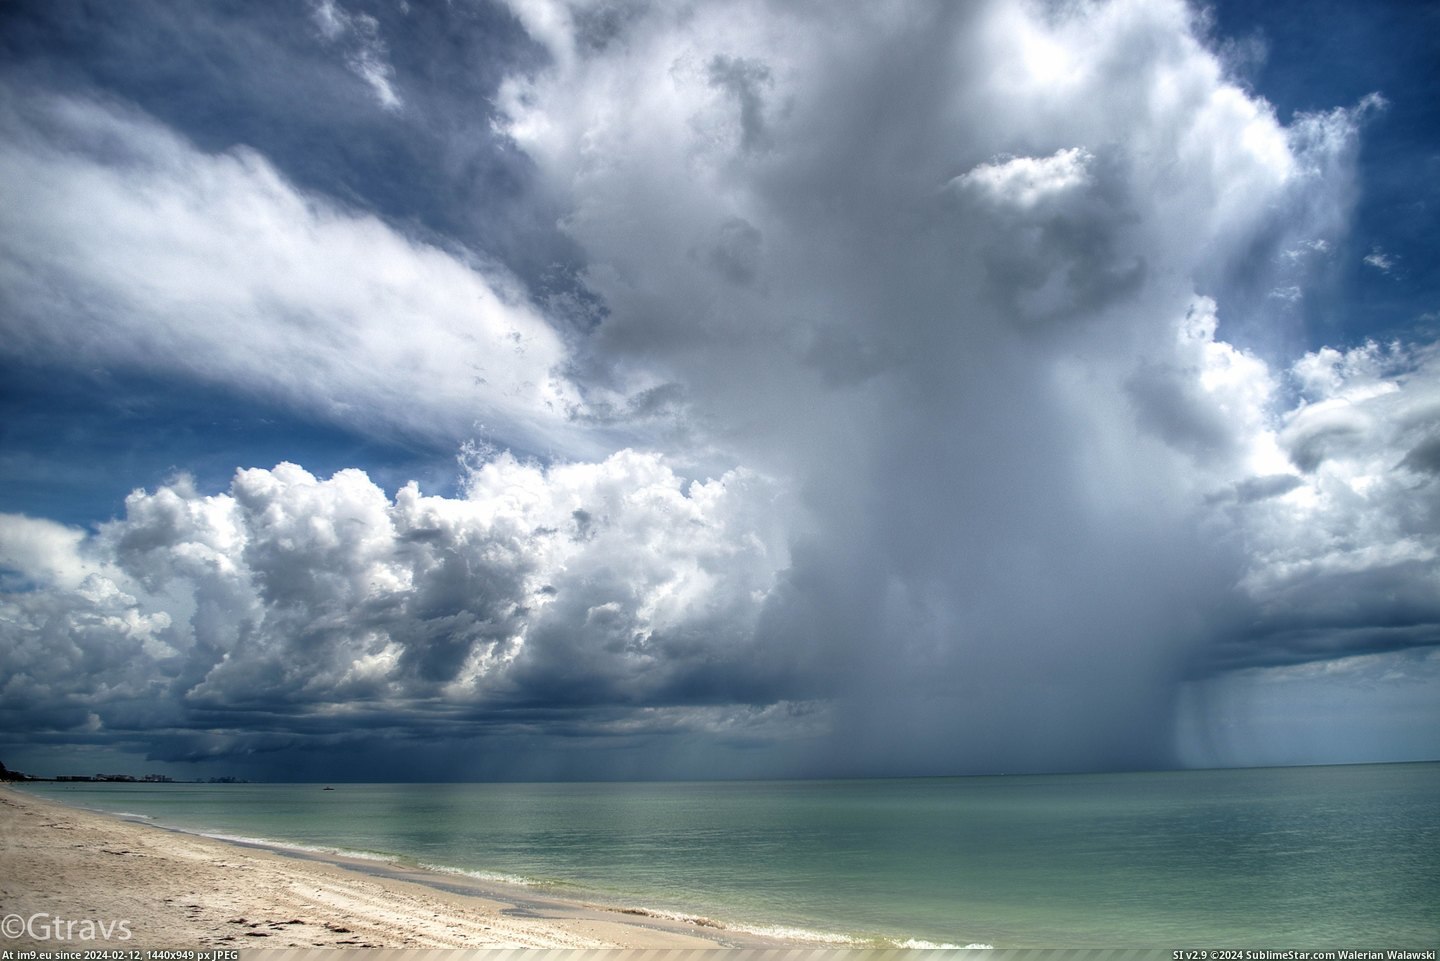 #Photo #Shower #North #Miles #Greg #Isolated #Travers #Rain #Naples #Florida [Earthporn] A photo I took of an isolated rain shower about 15 miles north of Naples, Florida. ©Greg Travers [4935x3266] Pic. (Bild von album My r/EARTHPORN favs))